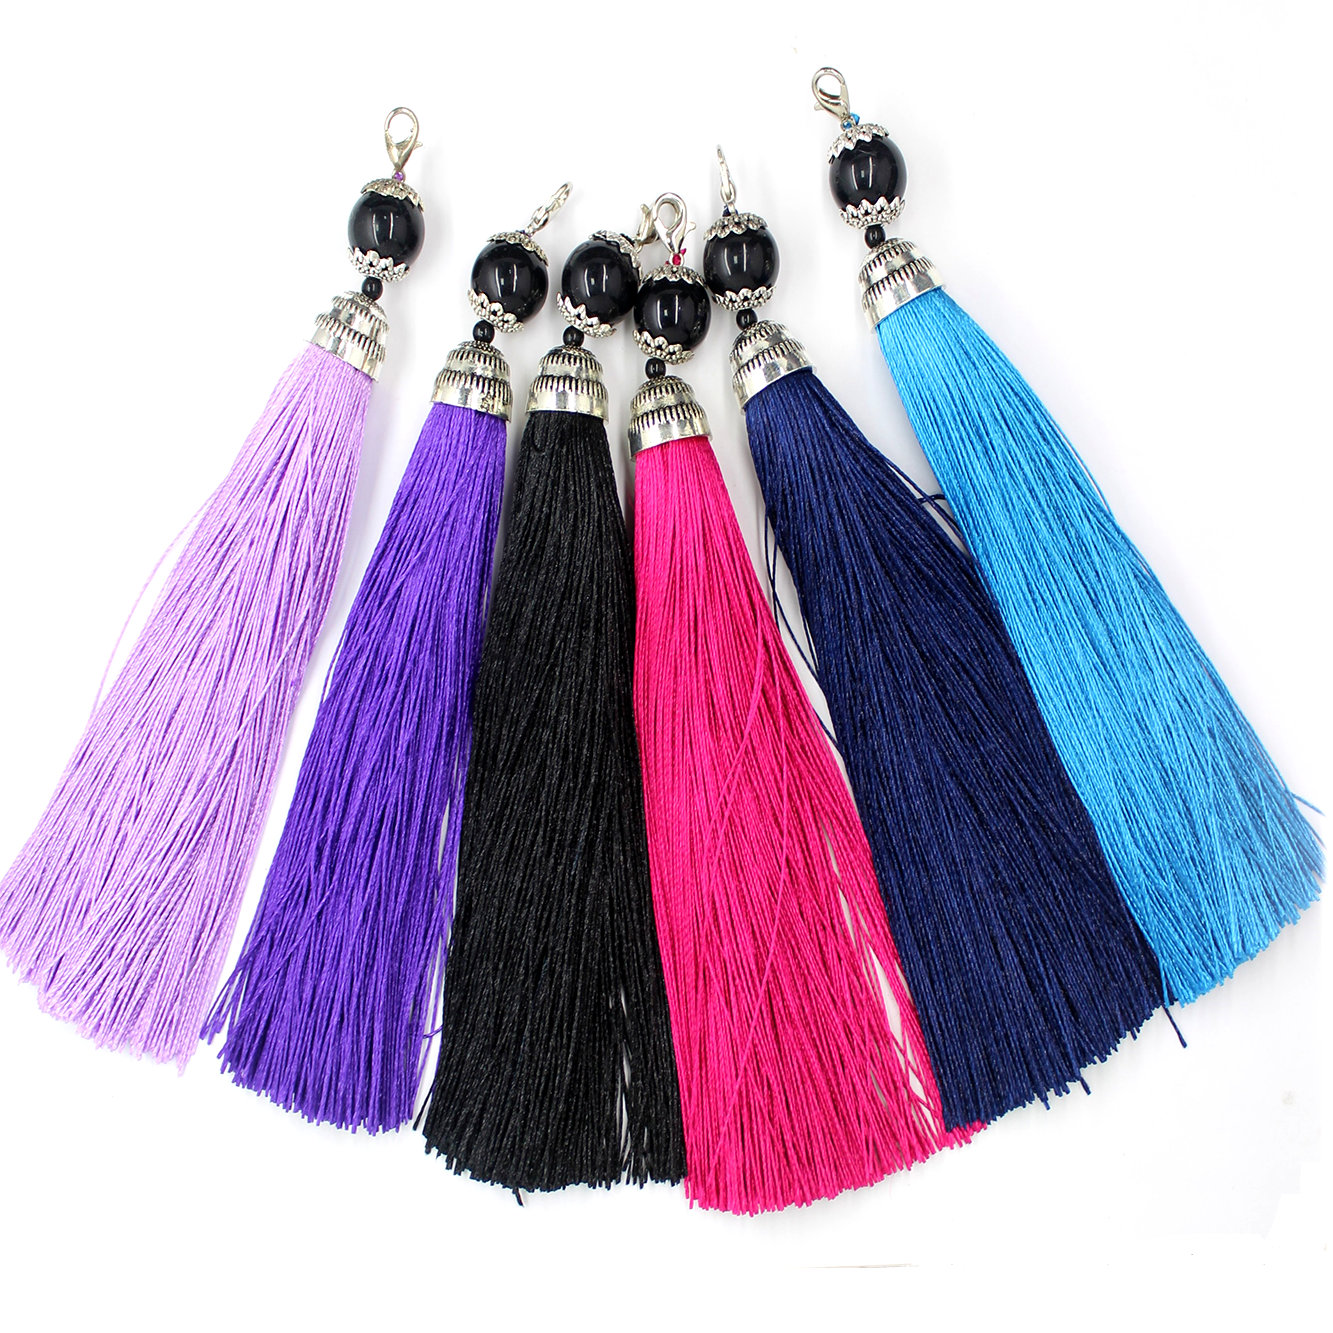 Tassels, Silk Fringe thread with Lobster Clasp, 6 inch, 1pc, Available in 13 colors